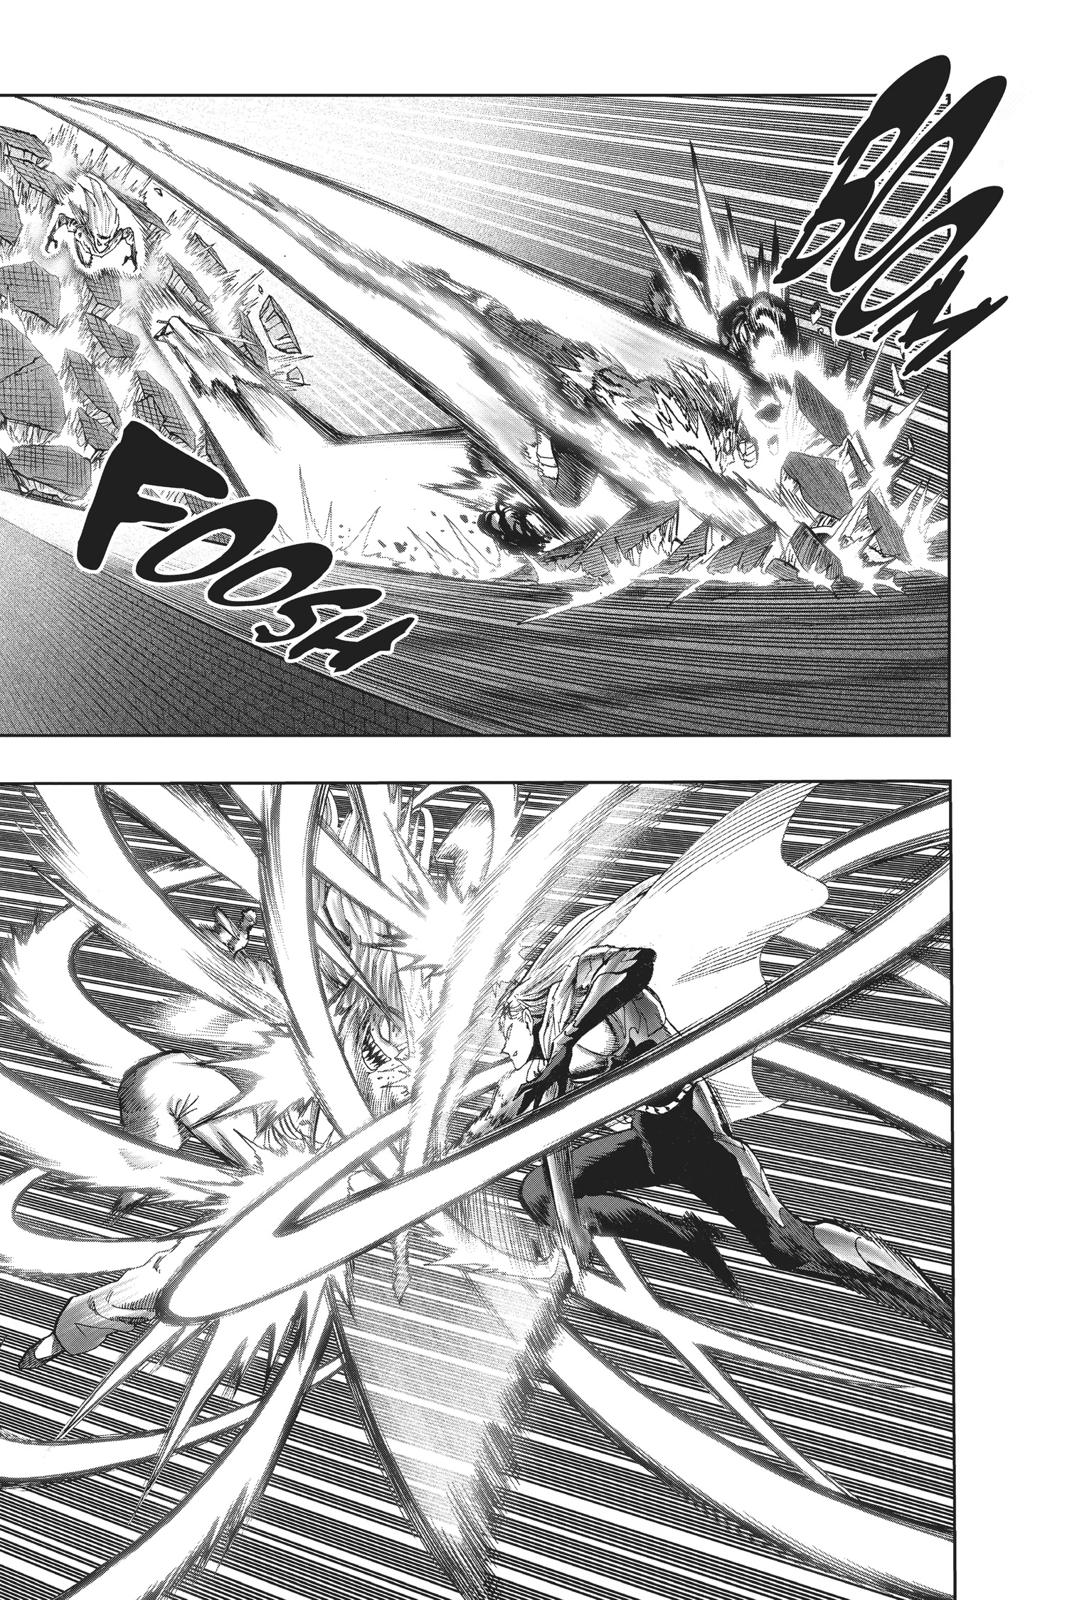 One-Punch Man, Punch 99 image 16